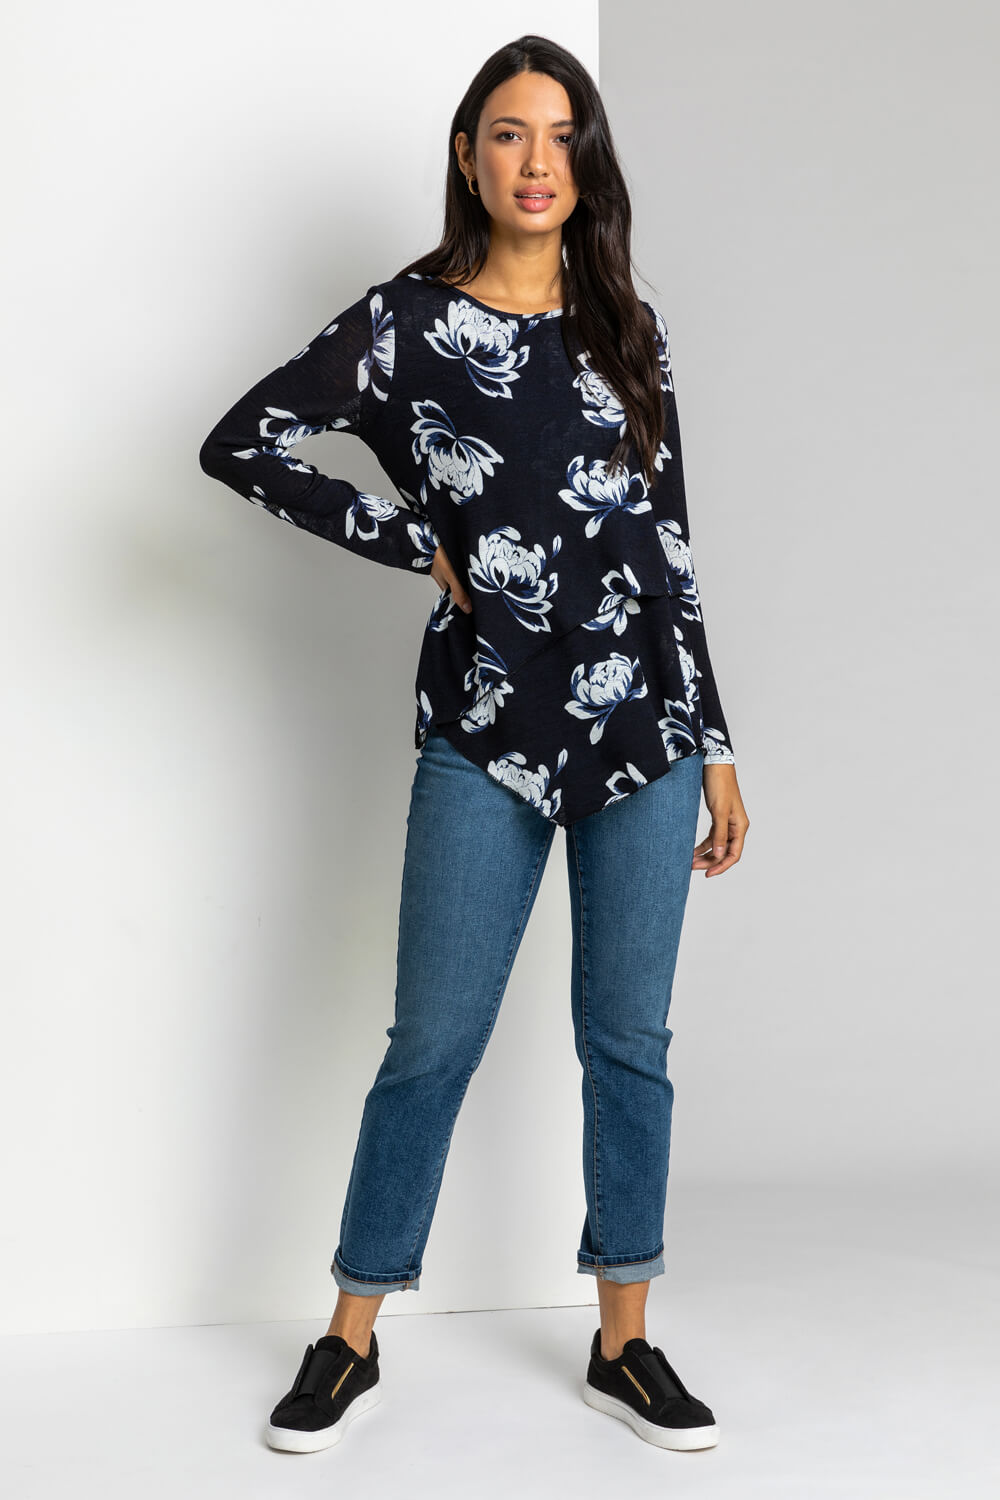 Navy  Floral Print Layered Asymmetric Tunic Top, Image 3 of 5